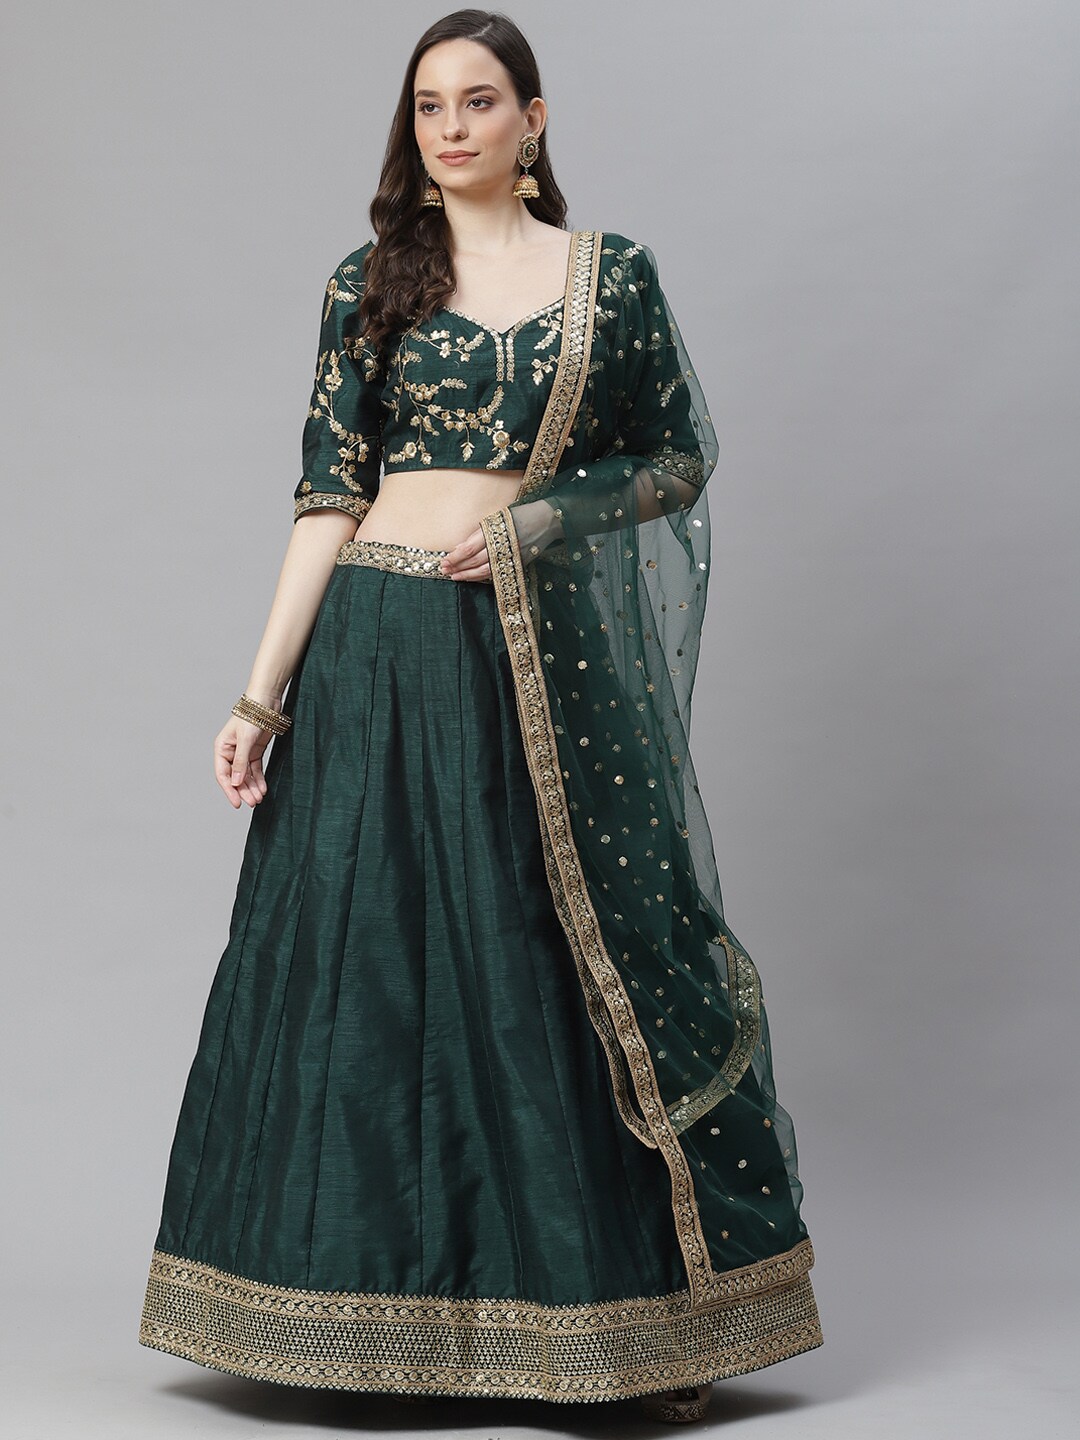 Readiprint Fashions Green & Gold-Toned Embroidered Sequinned Semi-Stitched Lehenga & Blouse With Dupatta Price in India